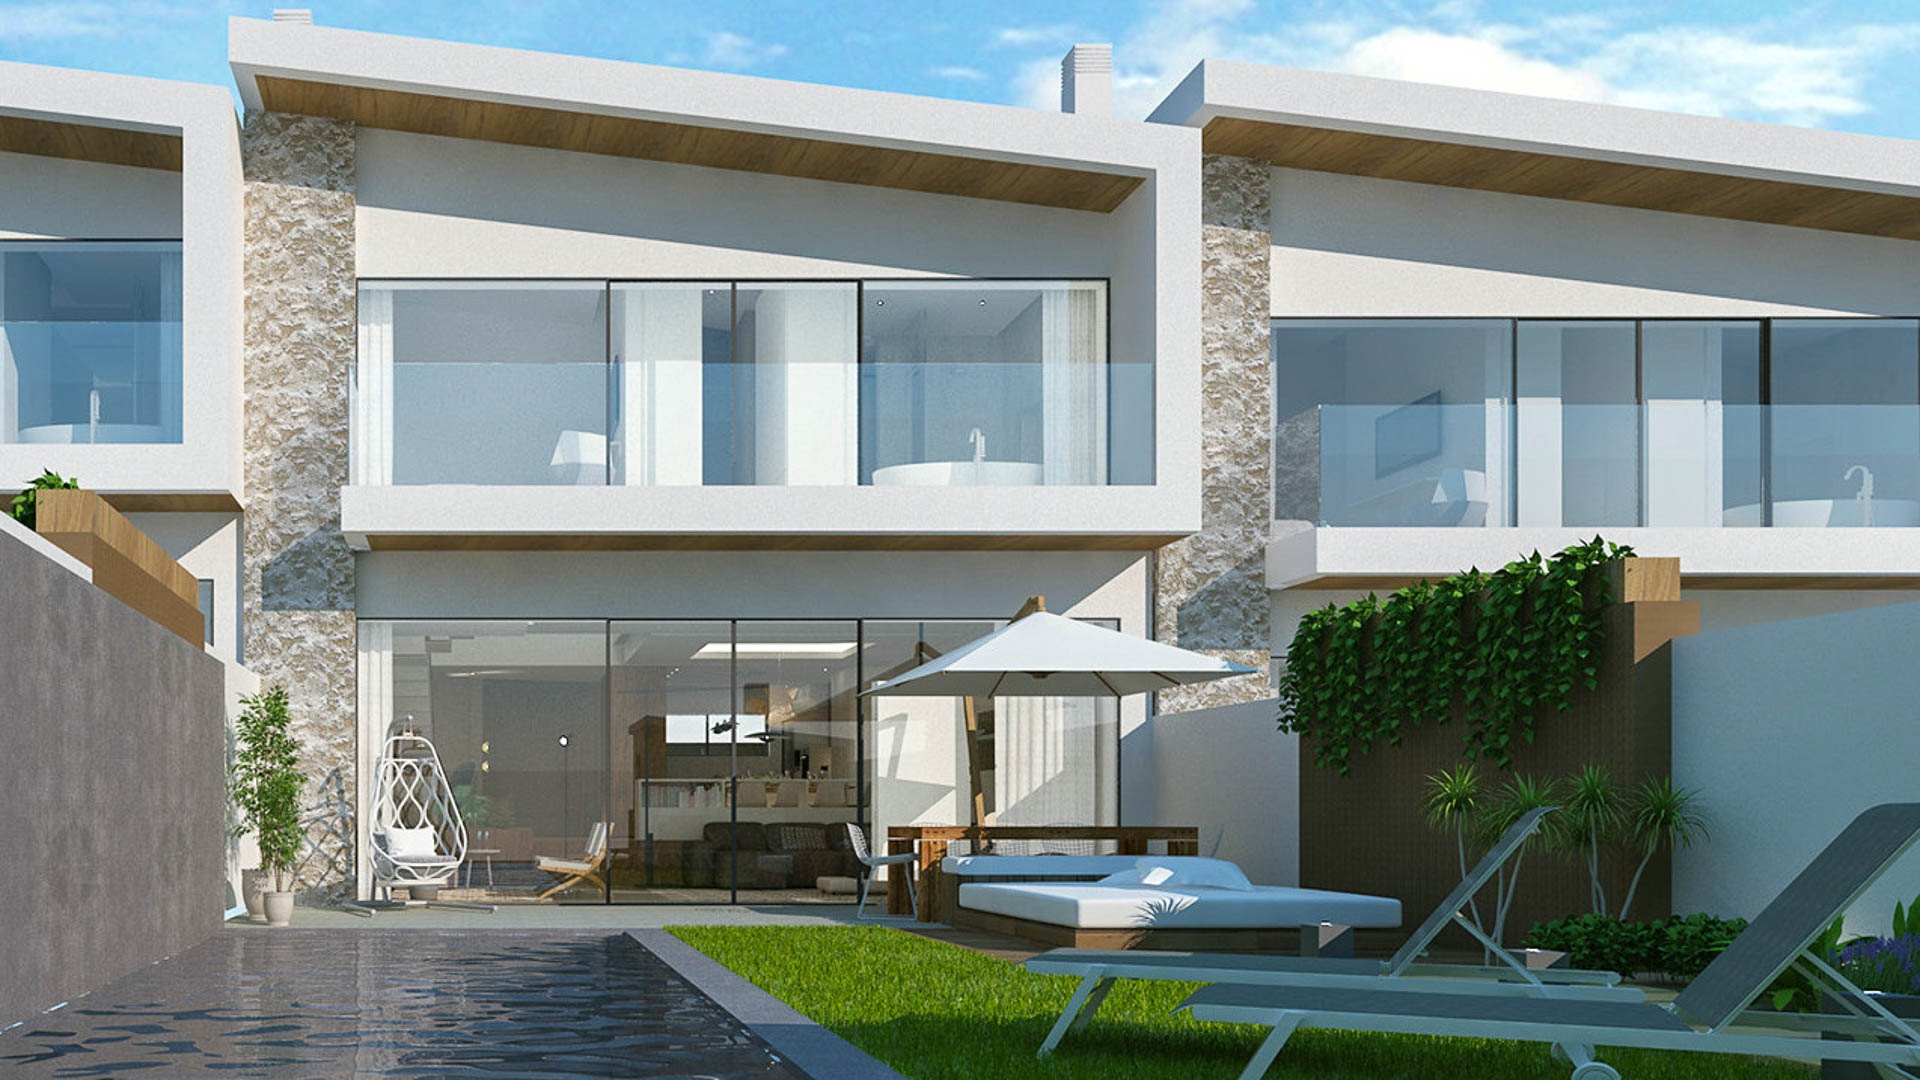 Contemporary 3 Bedroom Eco-Friendly Linked Villas in Boliqueime | VM1770 These ultra-modern linked villas are located in a central position very close to amenities in Boliqueime. Open plan living with high quality finishes for luxury lifestyle.